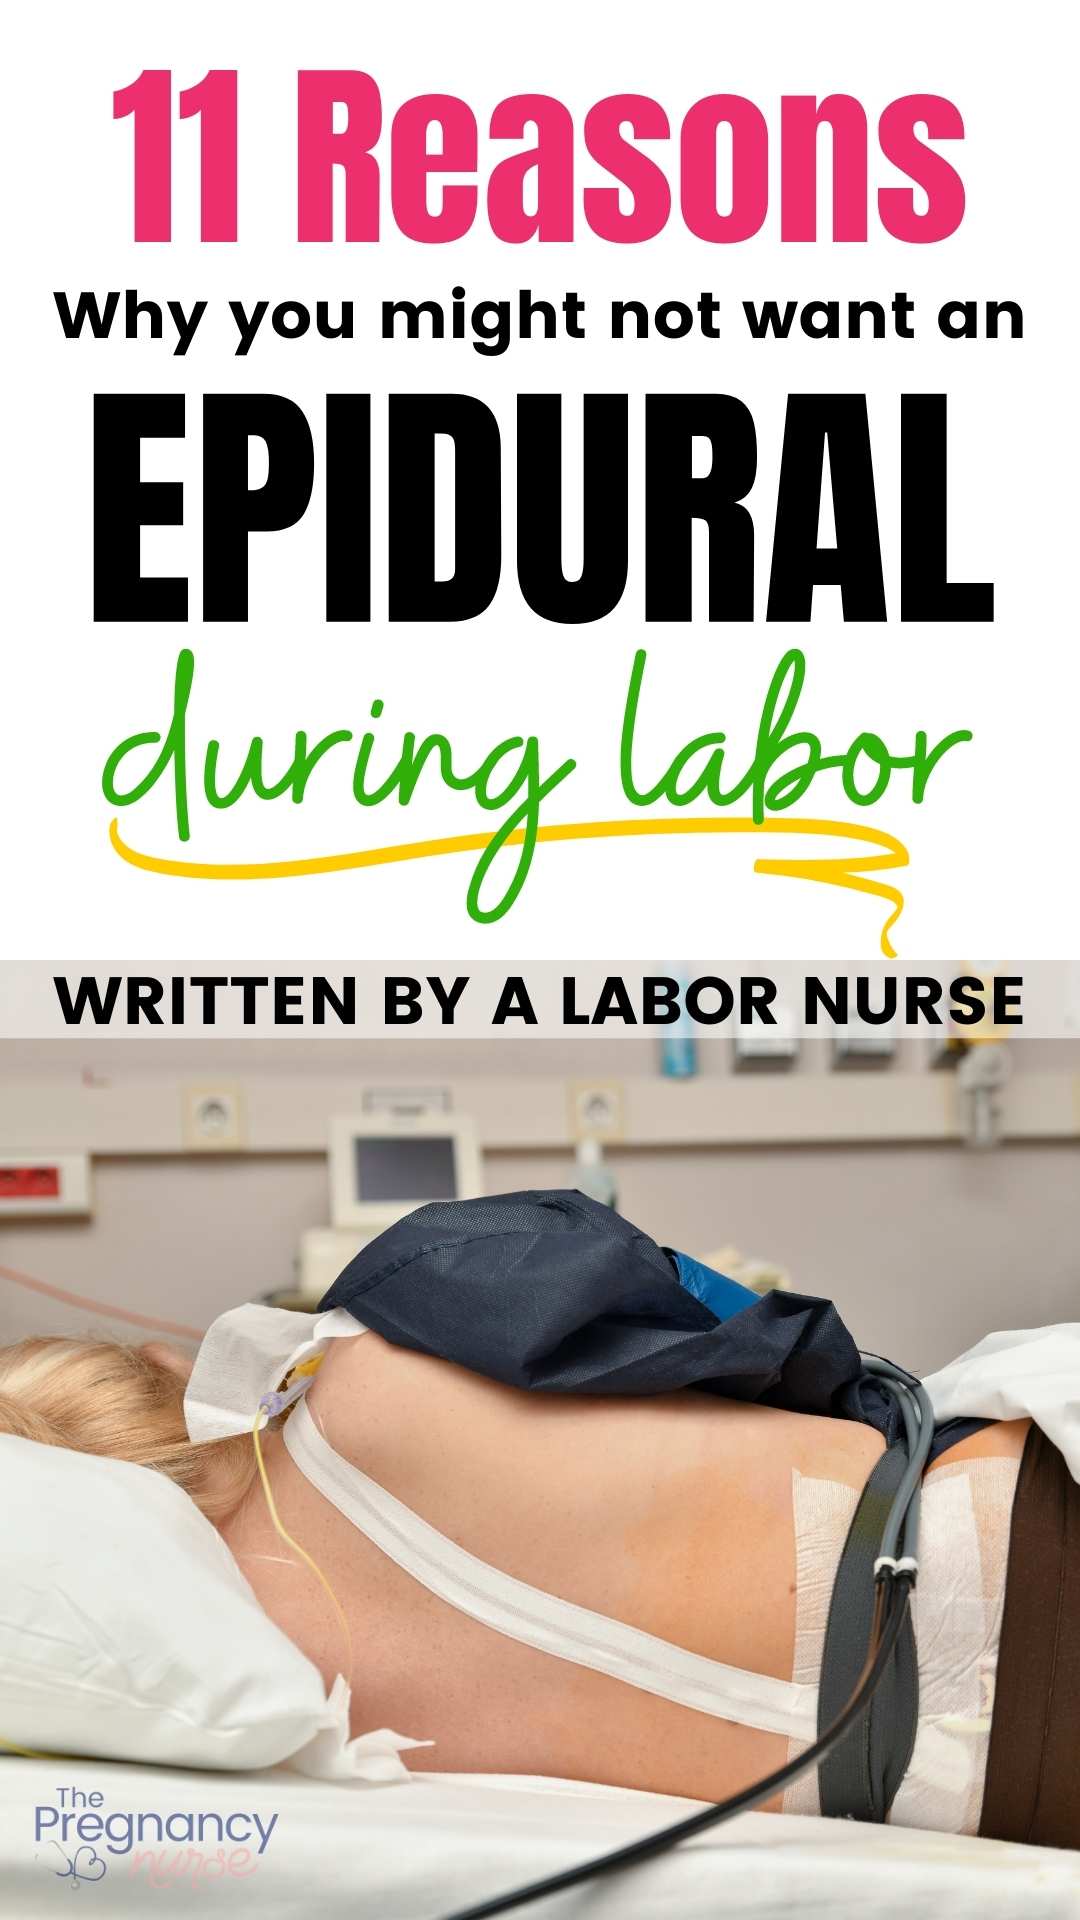 Did you know that only about 60 percent of women in the United States actually receive epidurals for pain relief during labor? Despite what many people believe, epidurals are not always the best option for pregnant women. In this blog post, we will discuss some of the risks and benefits associated with getting an epidural during labor. We hope that after reading this post, you will be better informed about whether or not an epidural is right for you. Stay tuned!